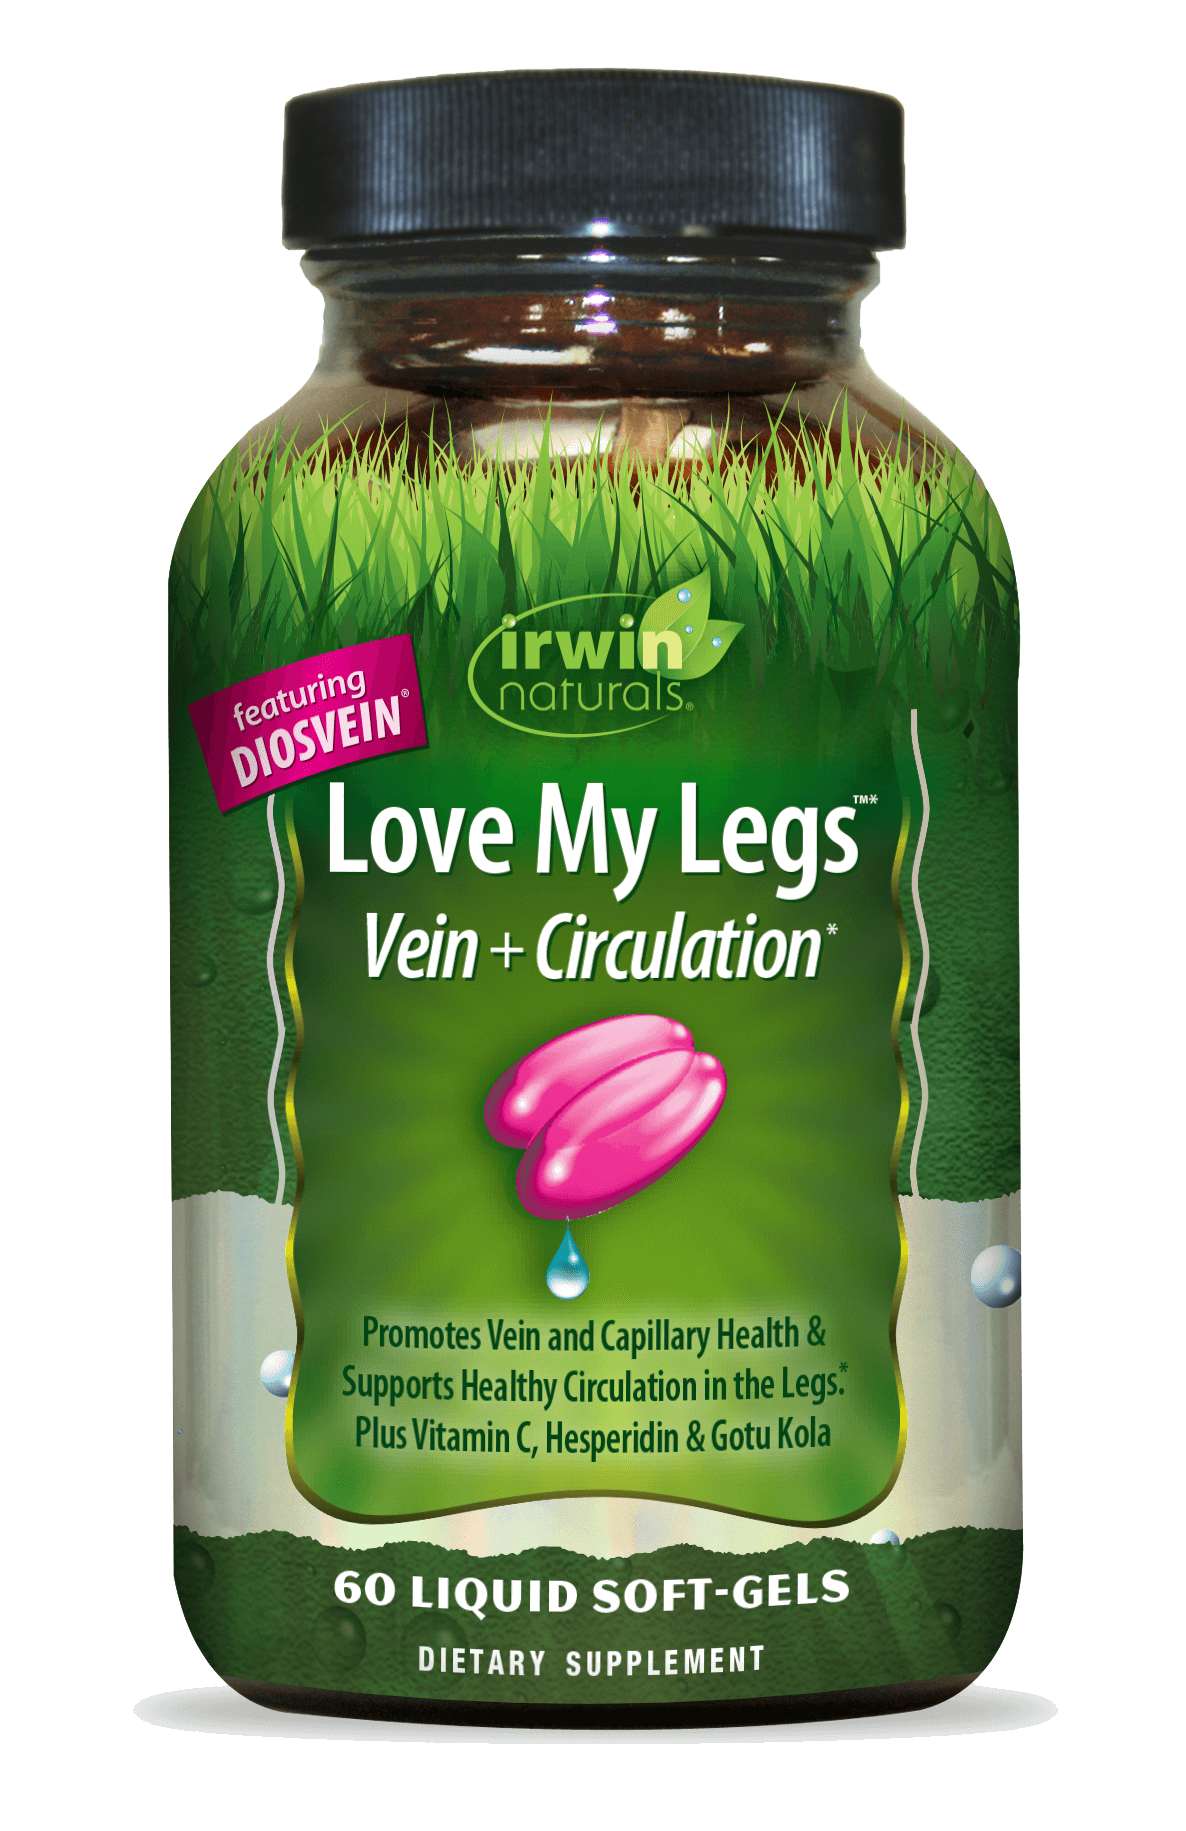 Love My Legs Vein and Circulation by Irwin Naturals